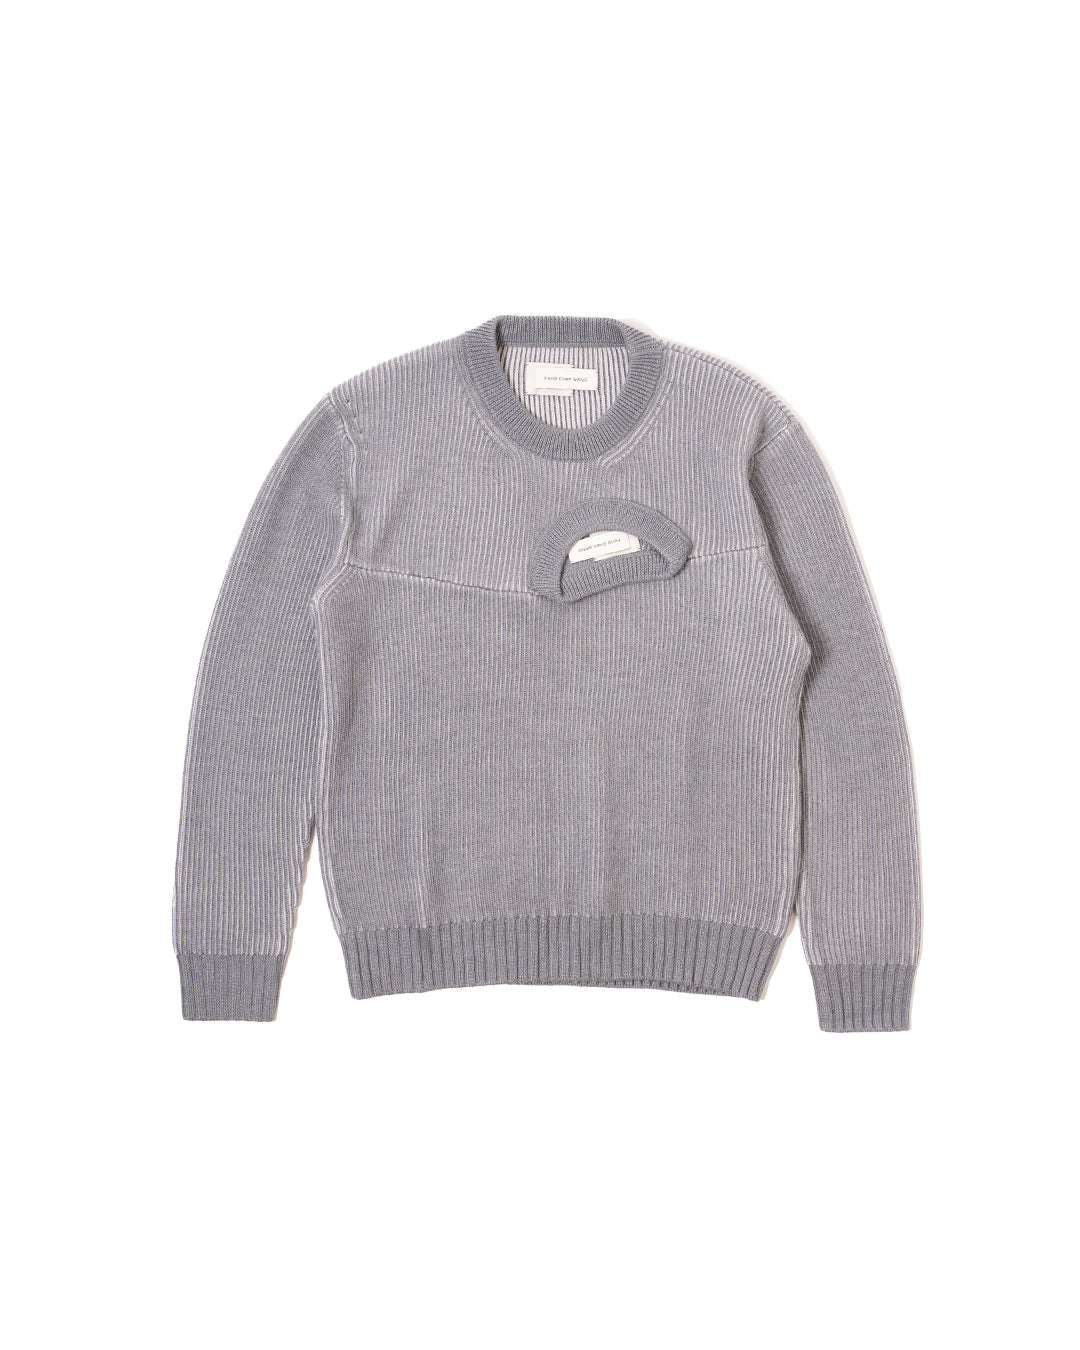 2 IN 1 SWEATER (GRY)